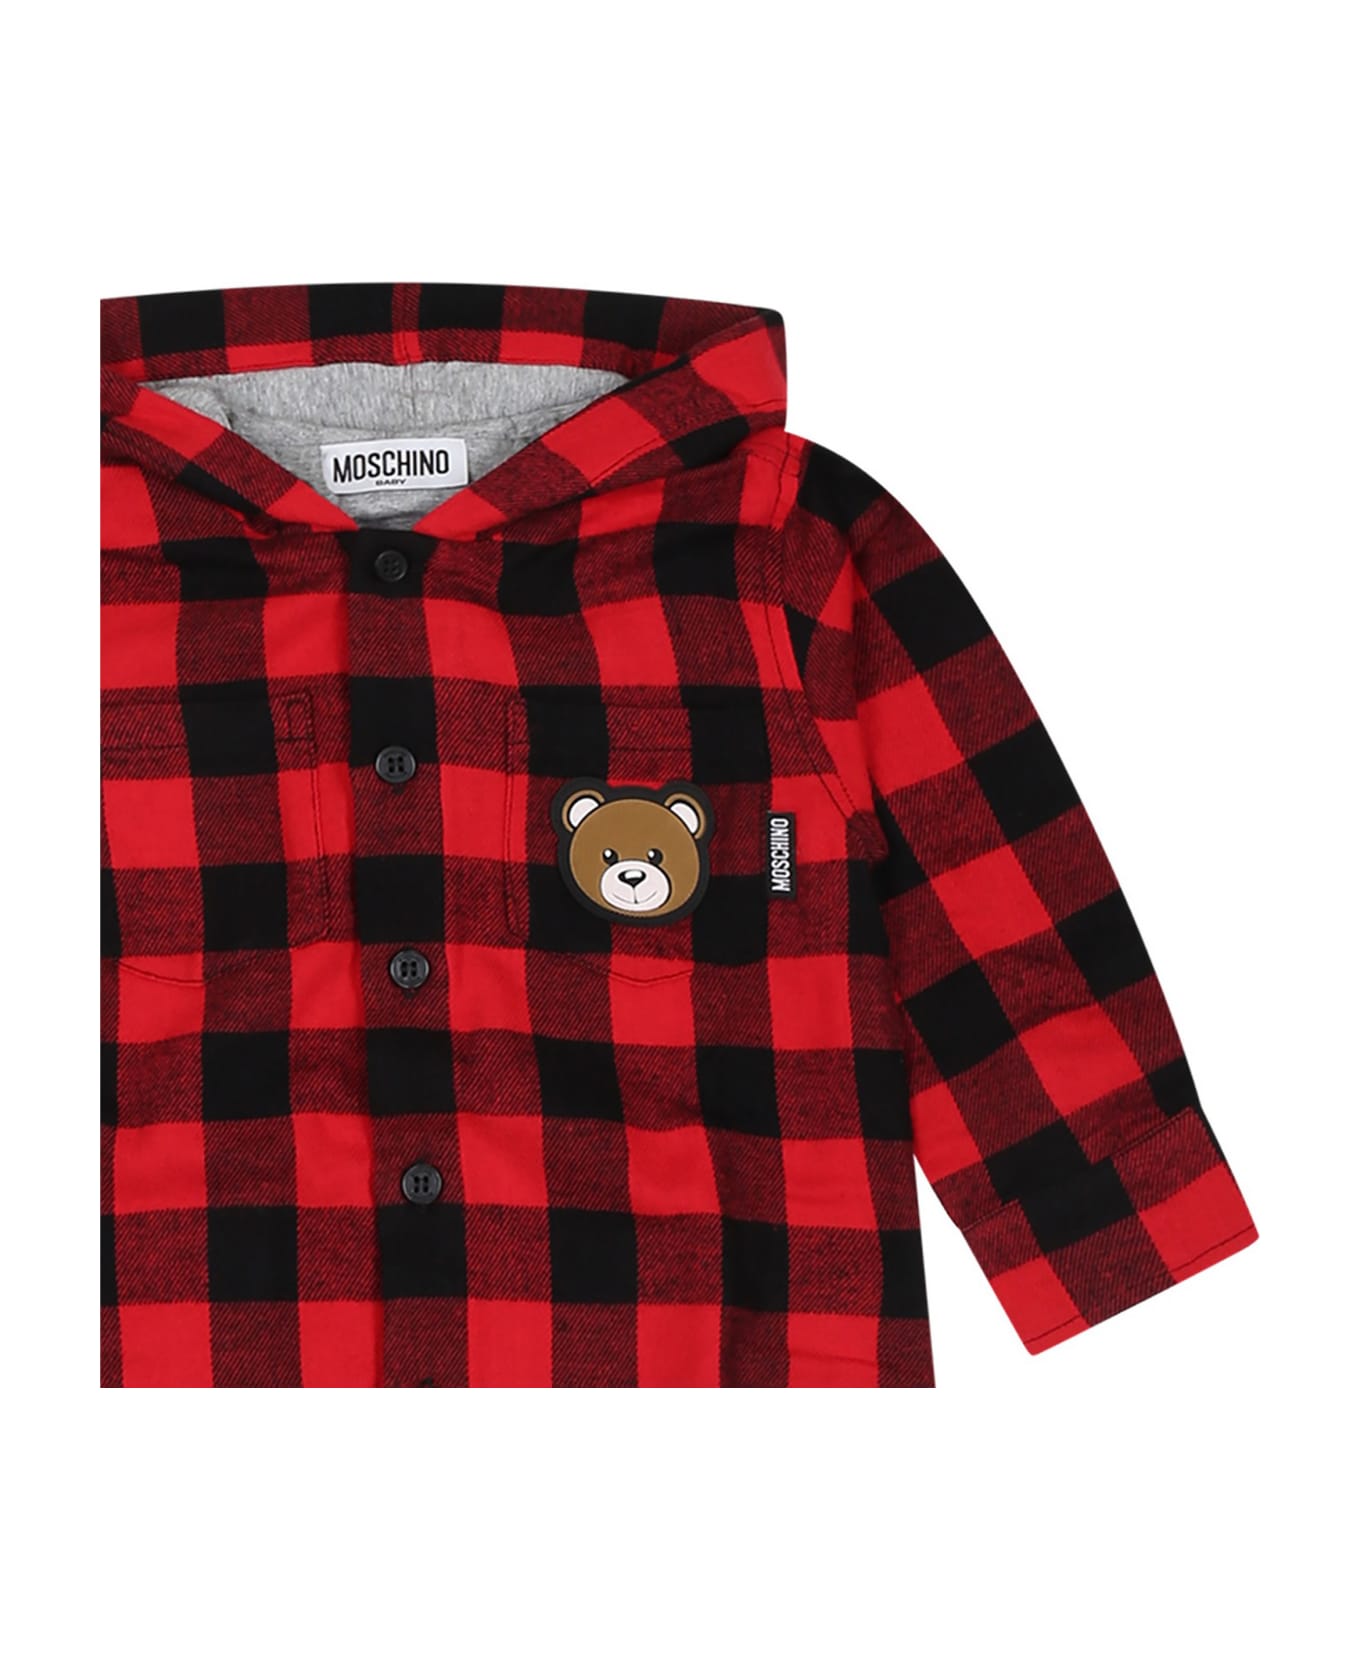 Moschino Red Shirt For Baby Boy With Teddy Bear And Logo - Red シャツ